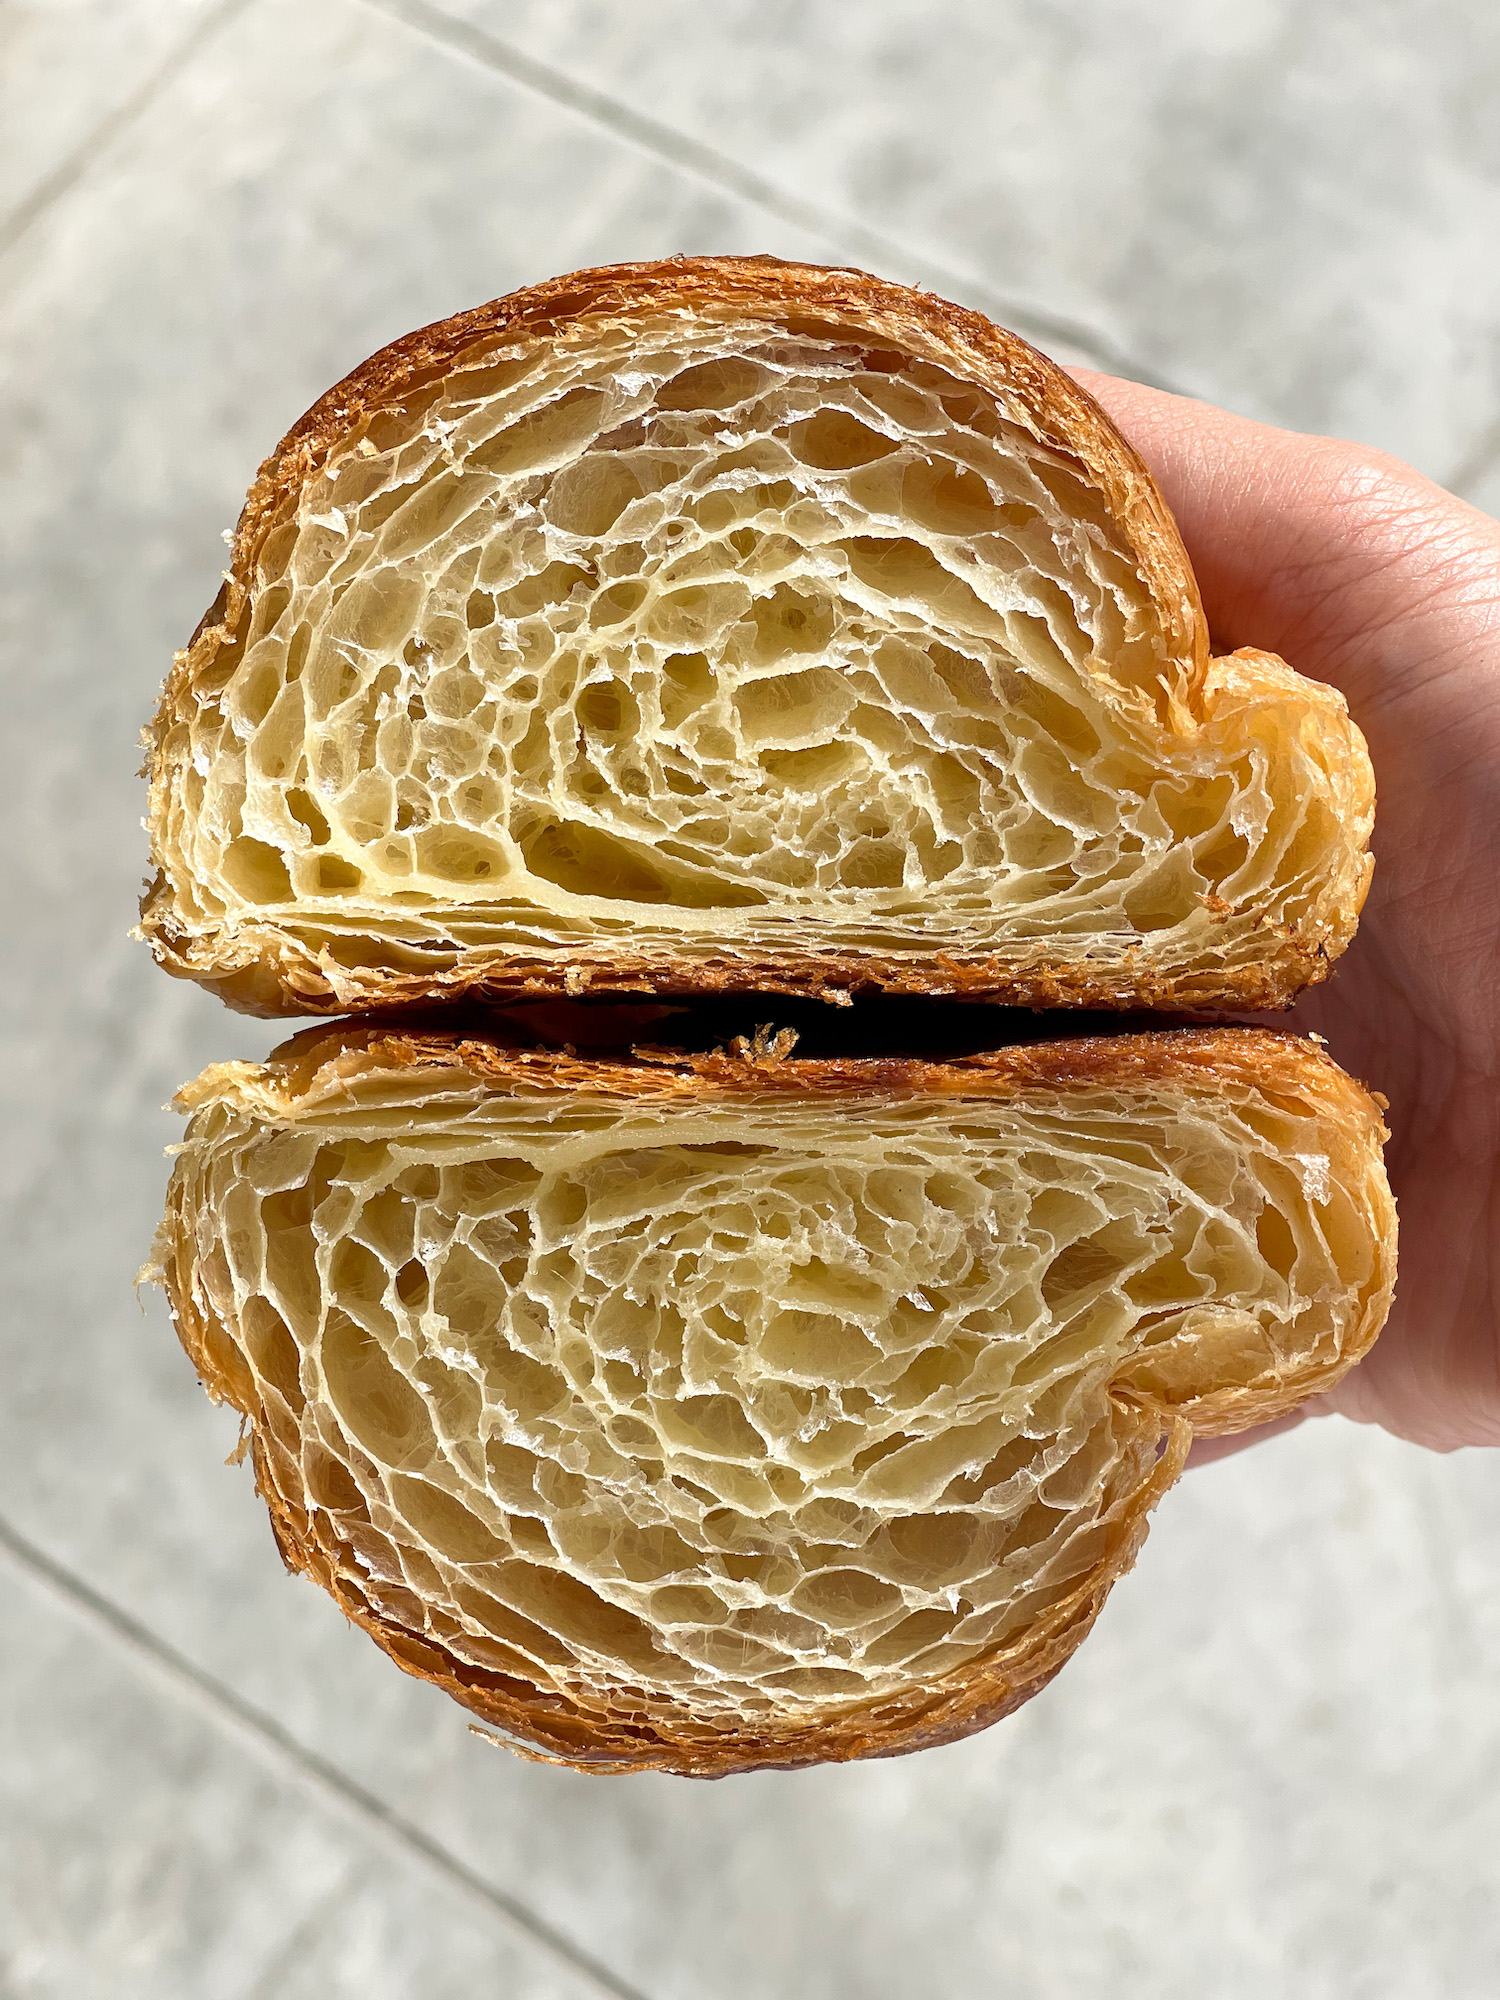 An inside look at The Daily Knead croissant